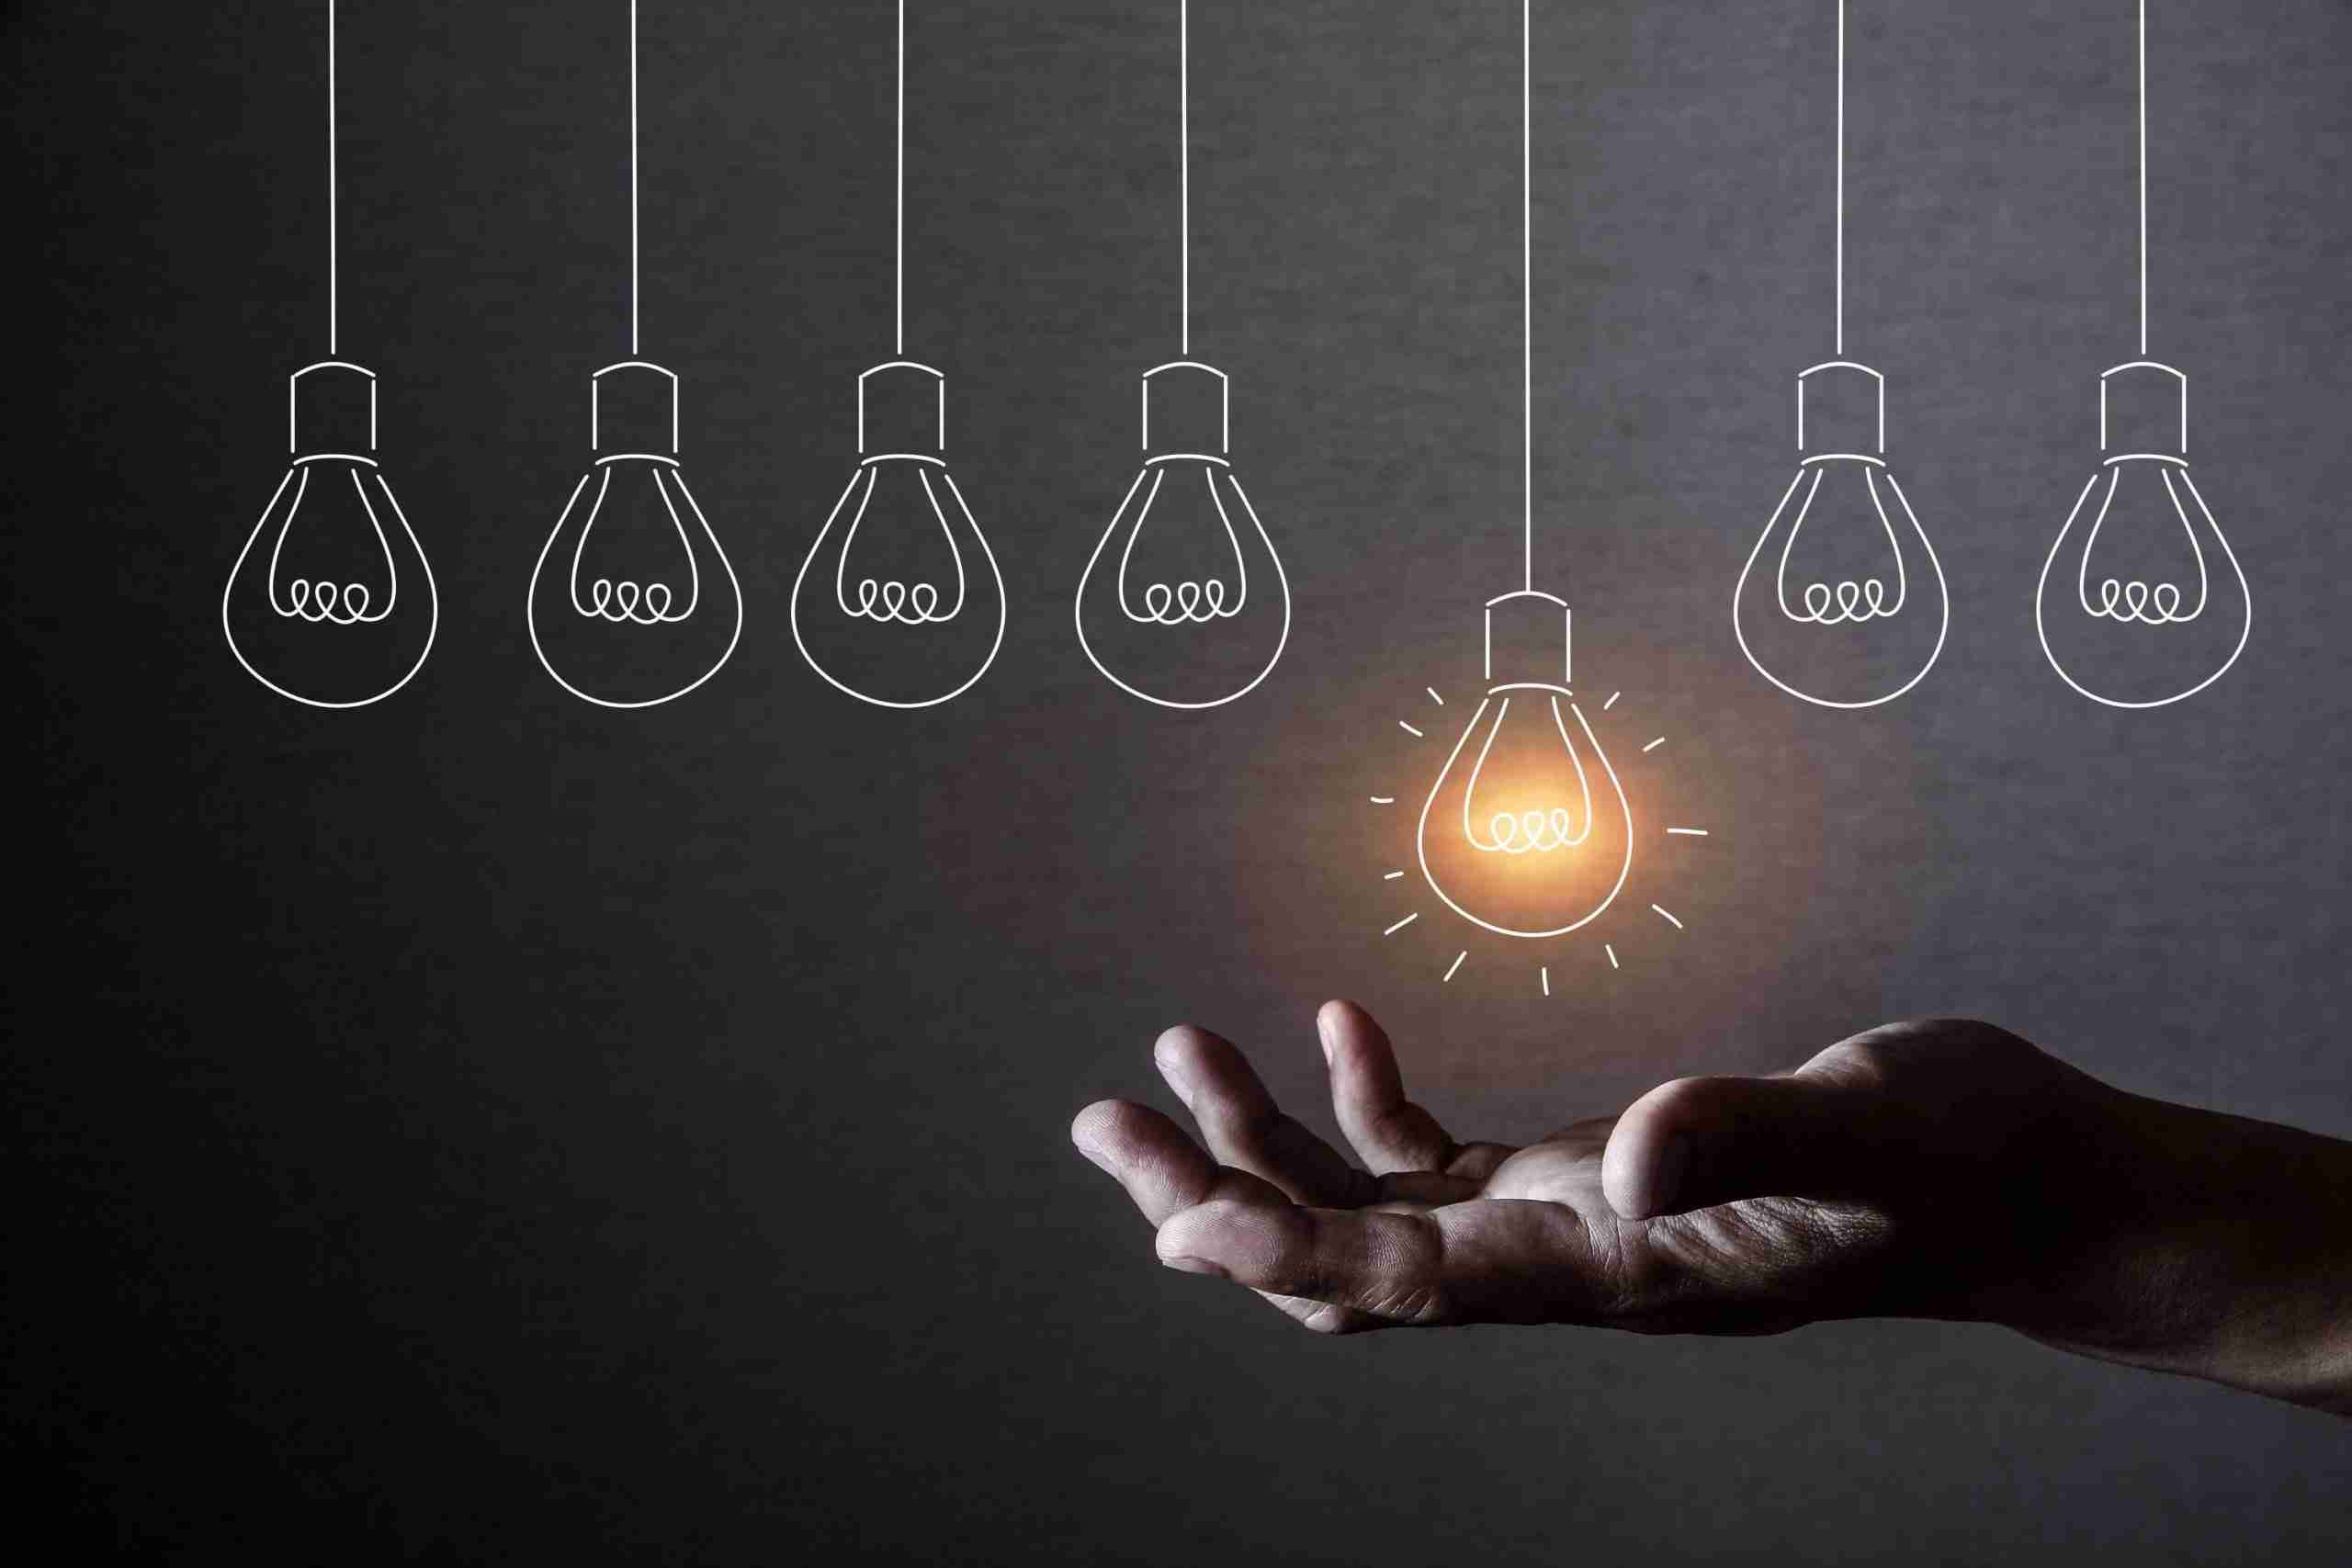 A picture of a set of hanging lightbulbs, with a hand situated underneath to grab them. This signifies the importance of capturing the insights and ideas of staff and customers in crafting an effective innovation strategy.